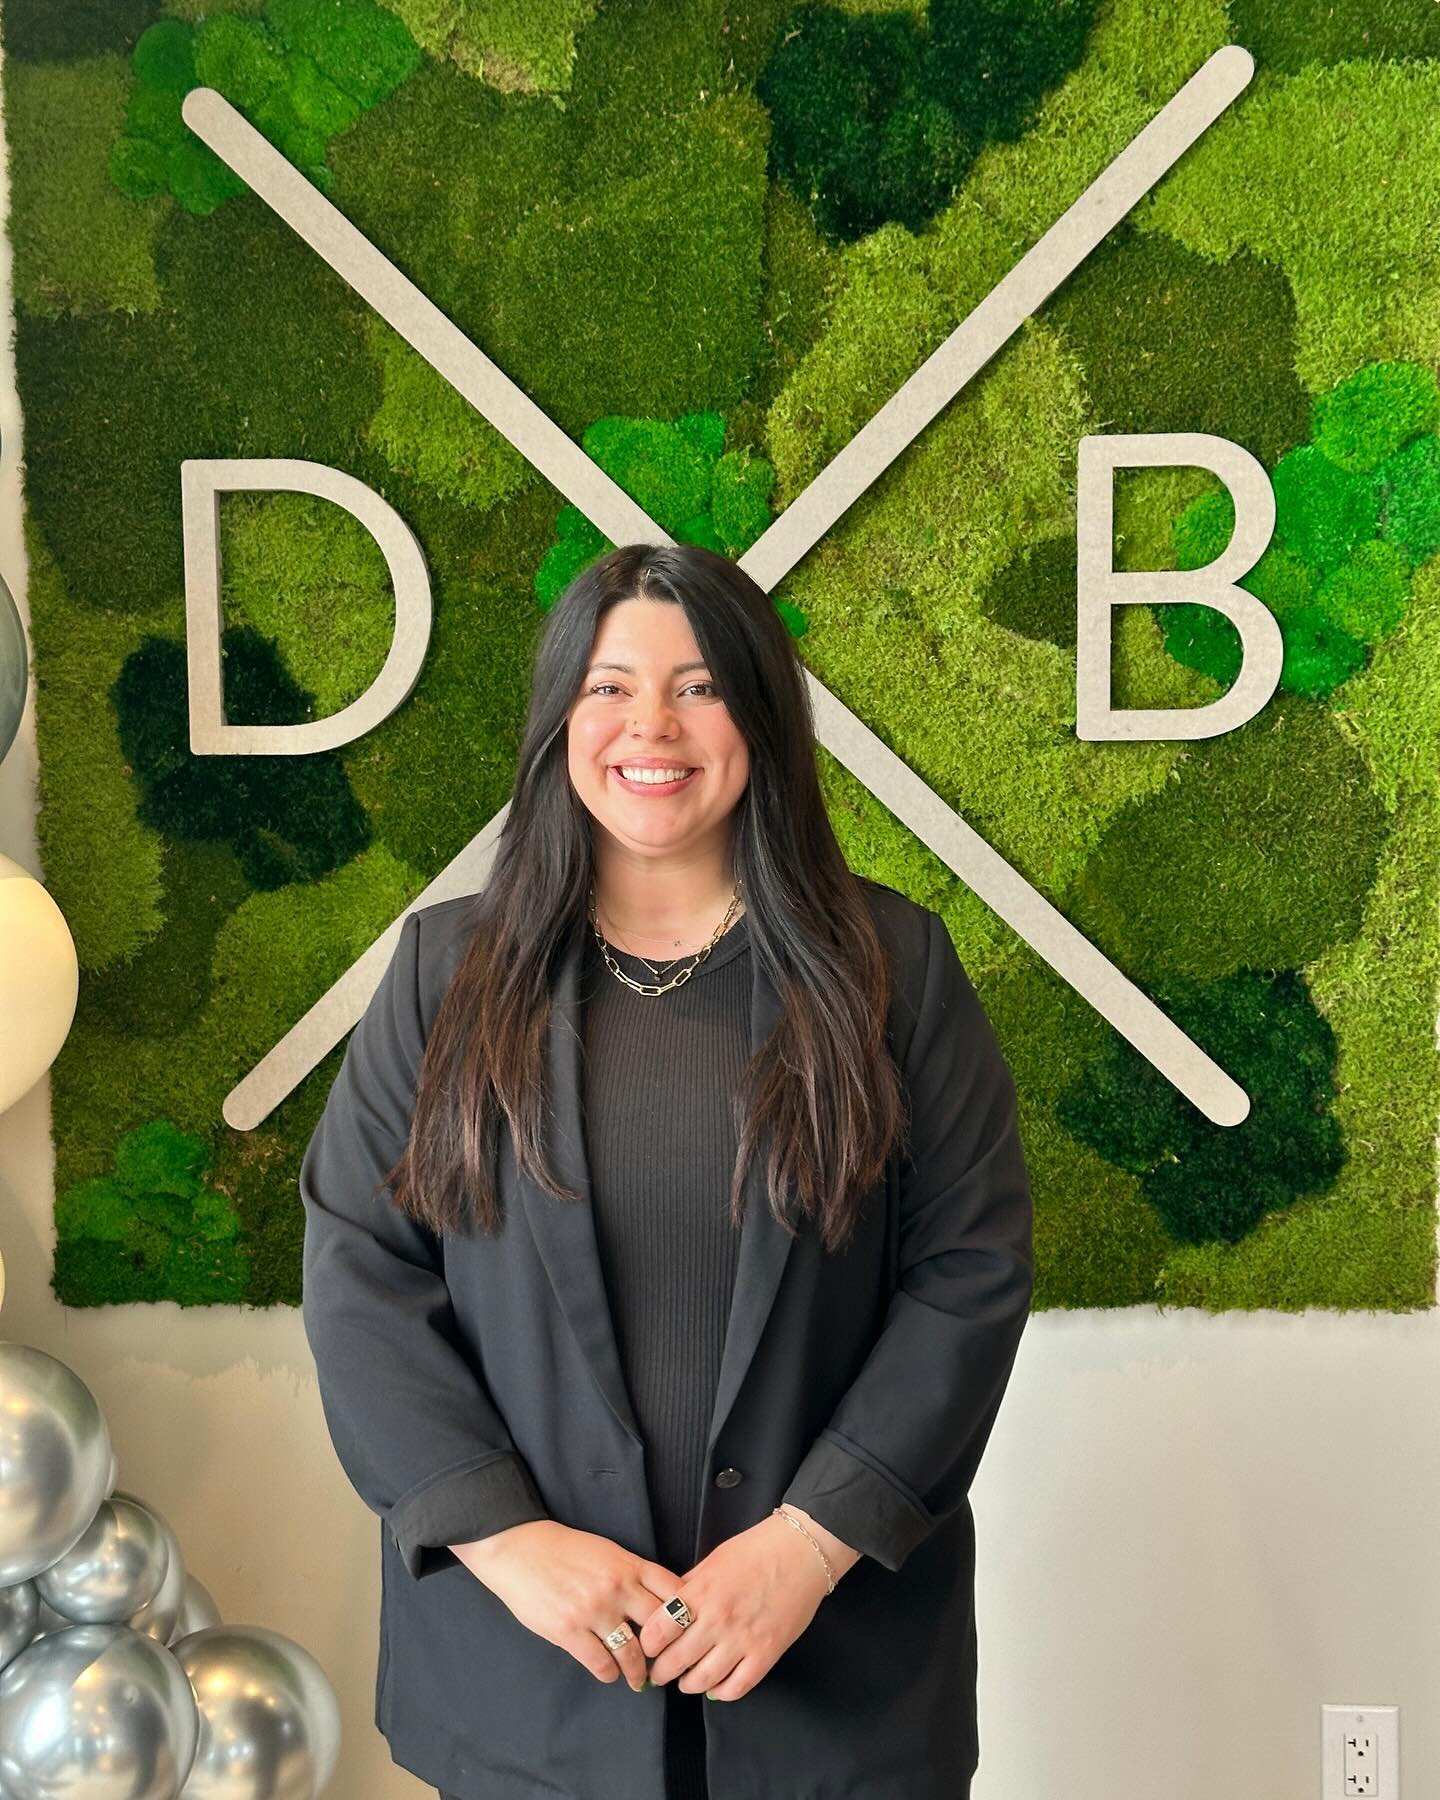 Meet our new Leasing Consultant - Courtney! Please  join us in welcoming her to The Darby! Schedule your apartment home tour with her today 816-319-4971 🎉